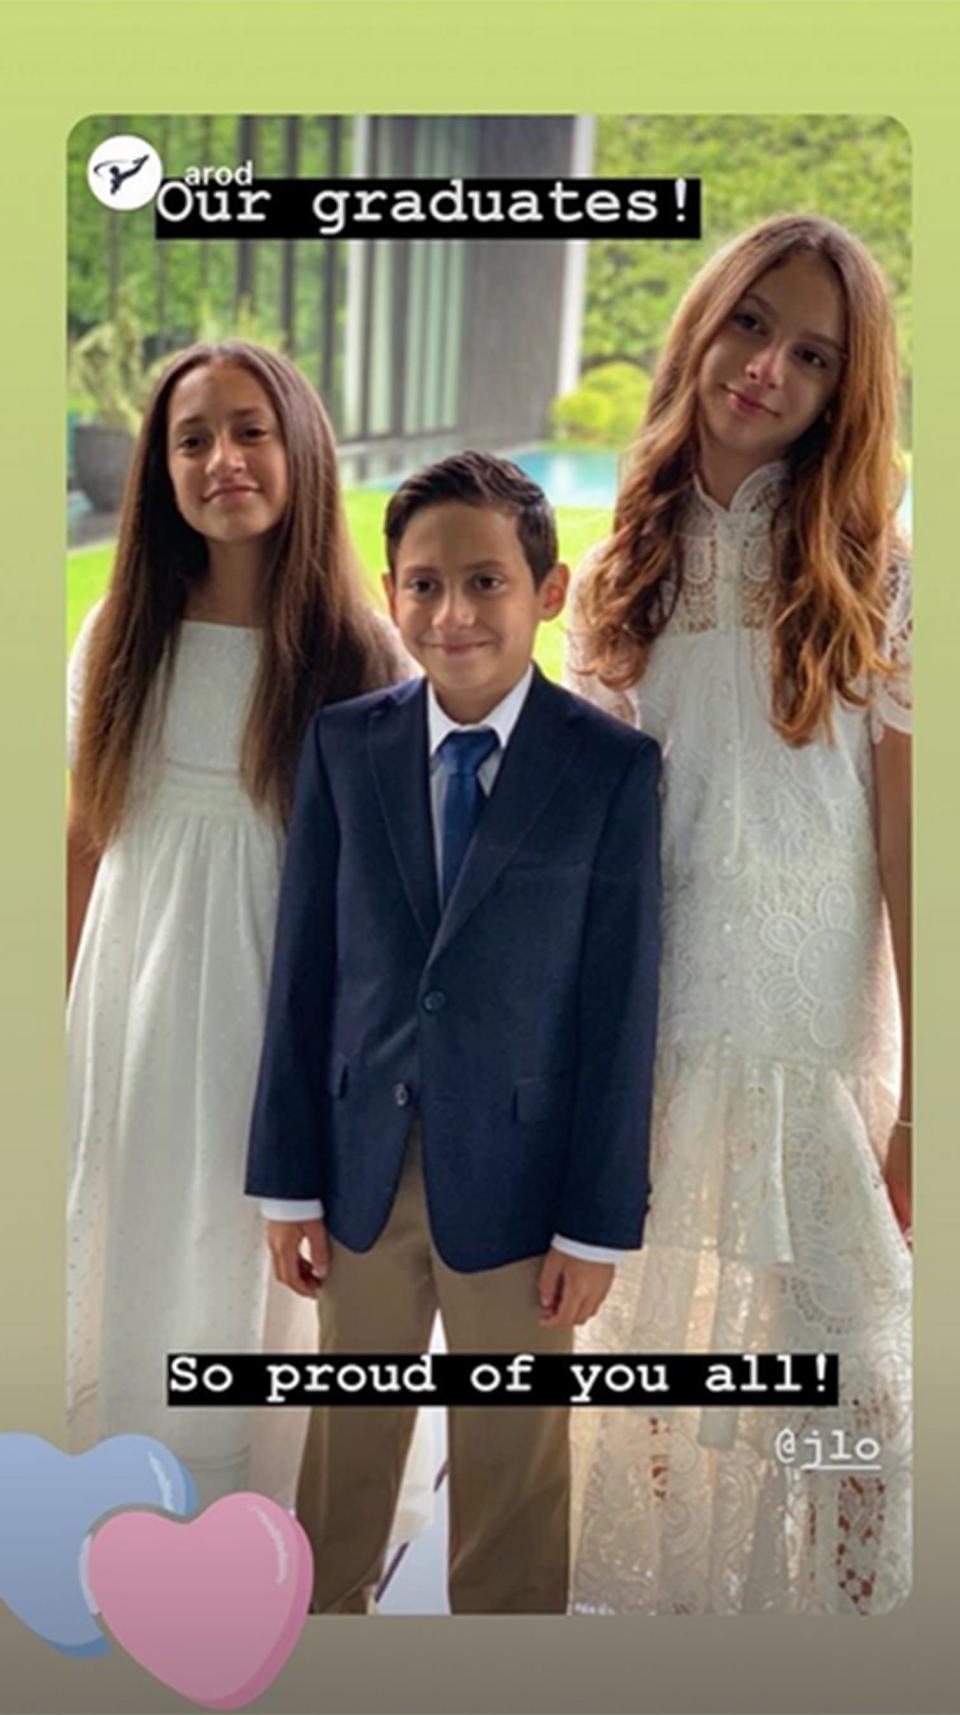 Jennifer Lopez's twins Emme and Max and Alex Rodriguez's youngest daughter Ella are moving on up to the sixth grade. Rodriguez took an Instagram snap of all three kids and added the caption: "Our graduates! So proud of you all!" The delighted dad also tagged fiancée Lopez in the photo so, of course, the happy mom of twins had to repost the sweet photo on her Instagram as well.